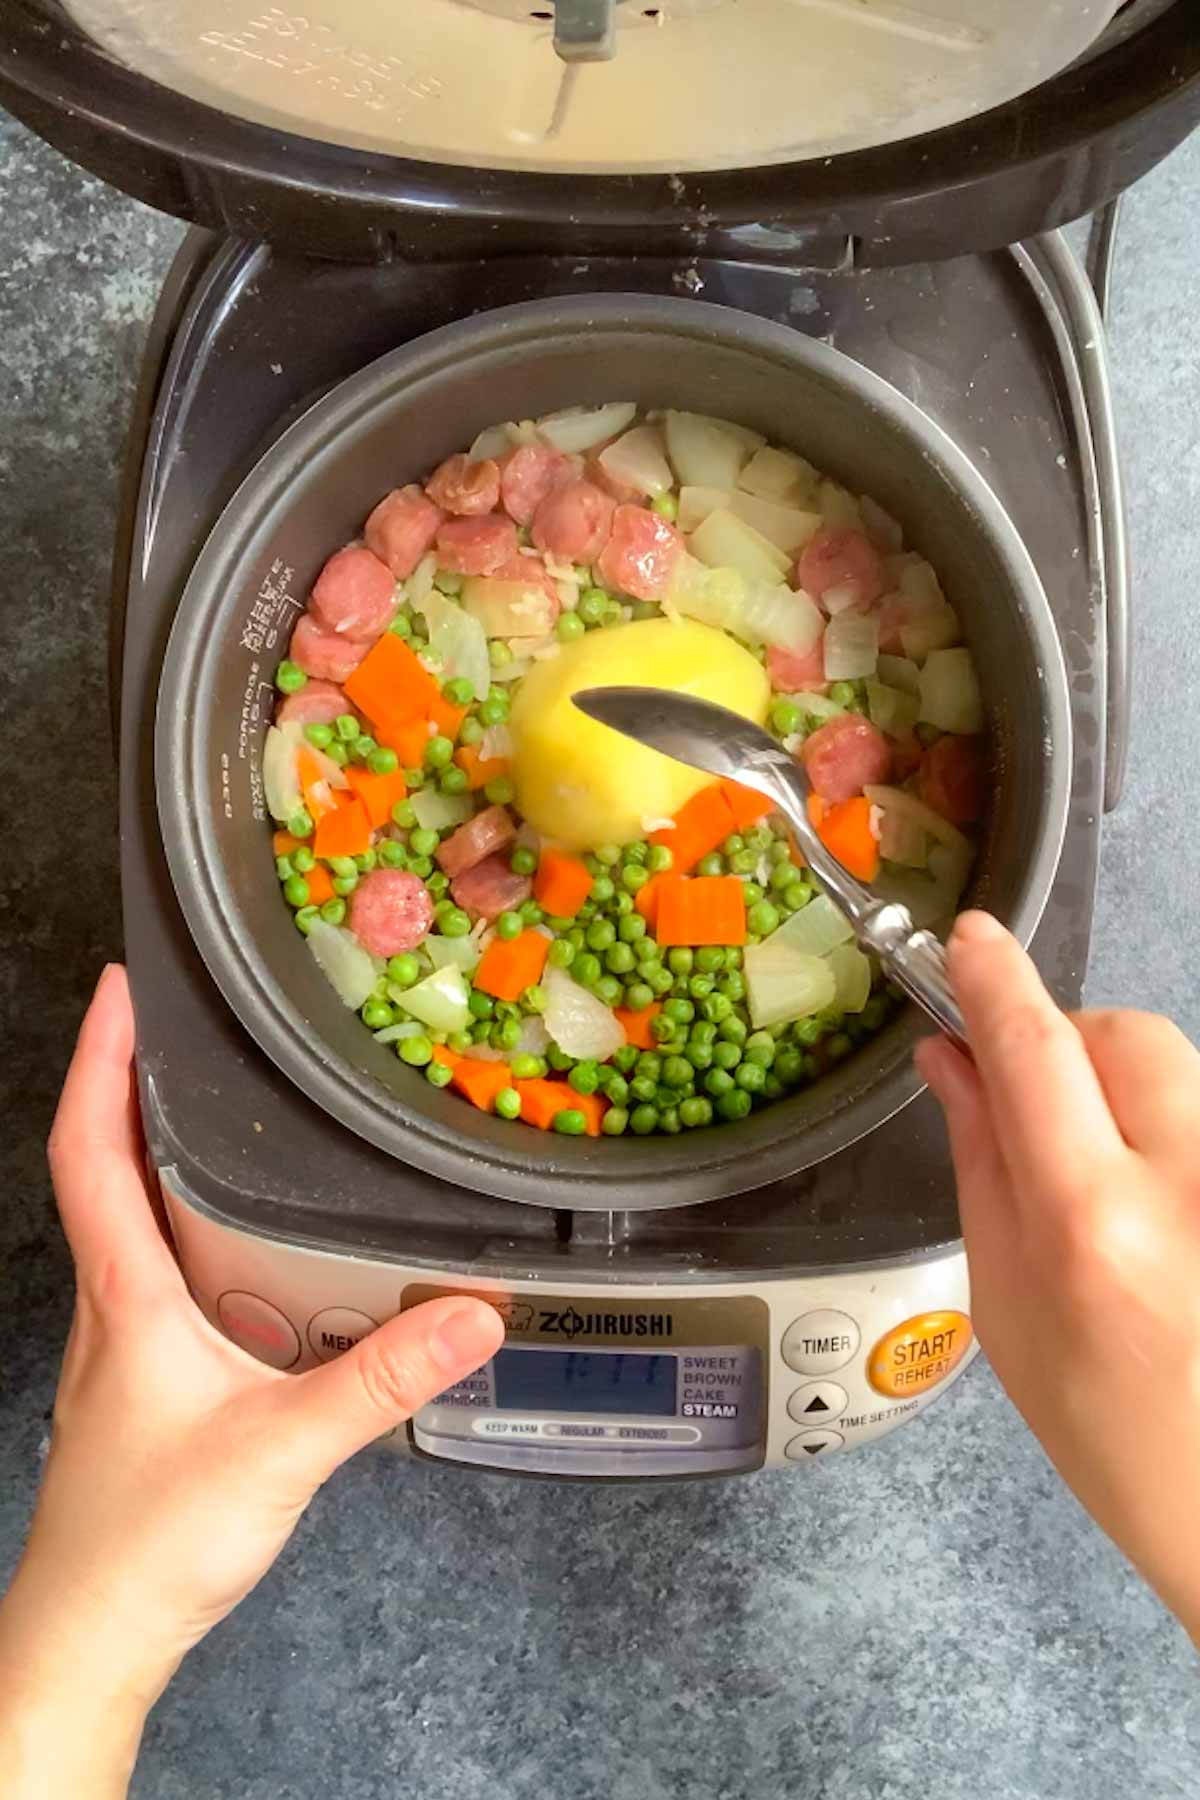 Chinese Rice Cooker Fried Rice is my absolute favorite. This no-fuss “dump and go” rice cooker recipe is made with a few simple ingredients with less than 5 minutes of prep! It’s so easy to make, customizable with any of your favorite mix-ins, and it’s incredibly delicious.